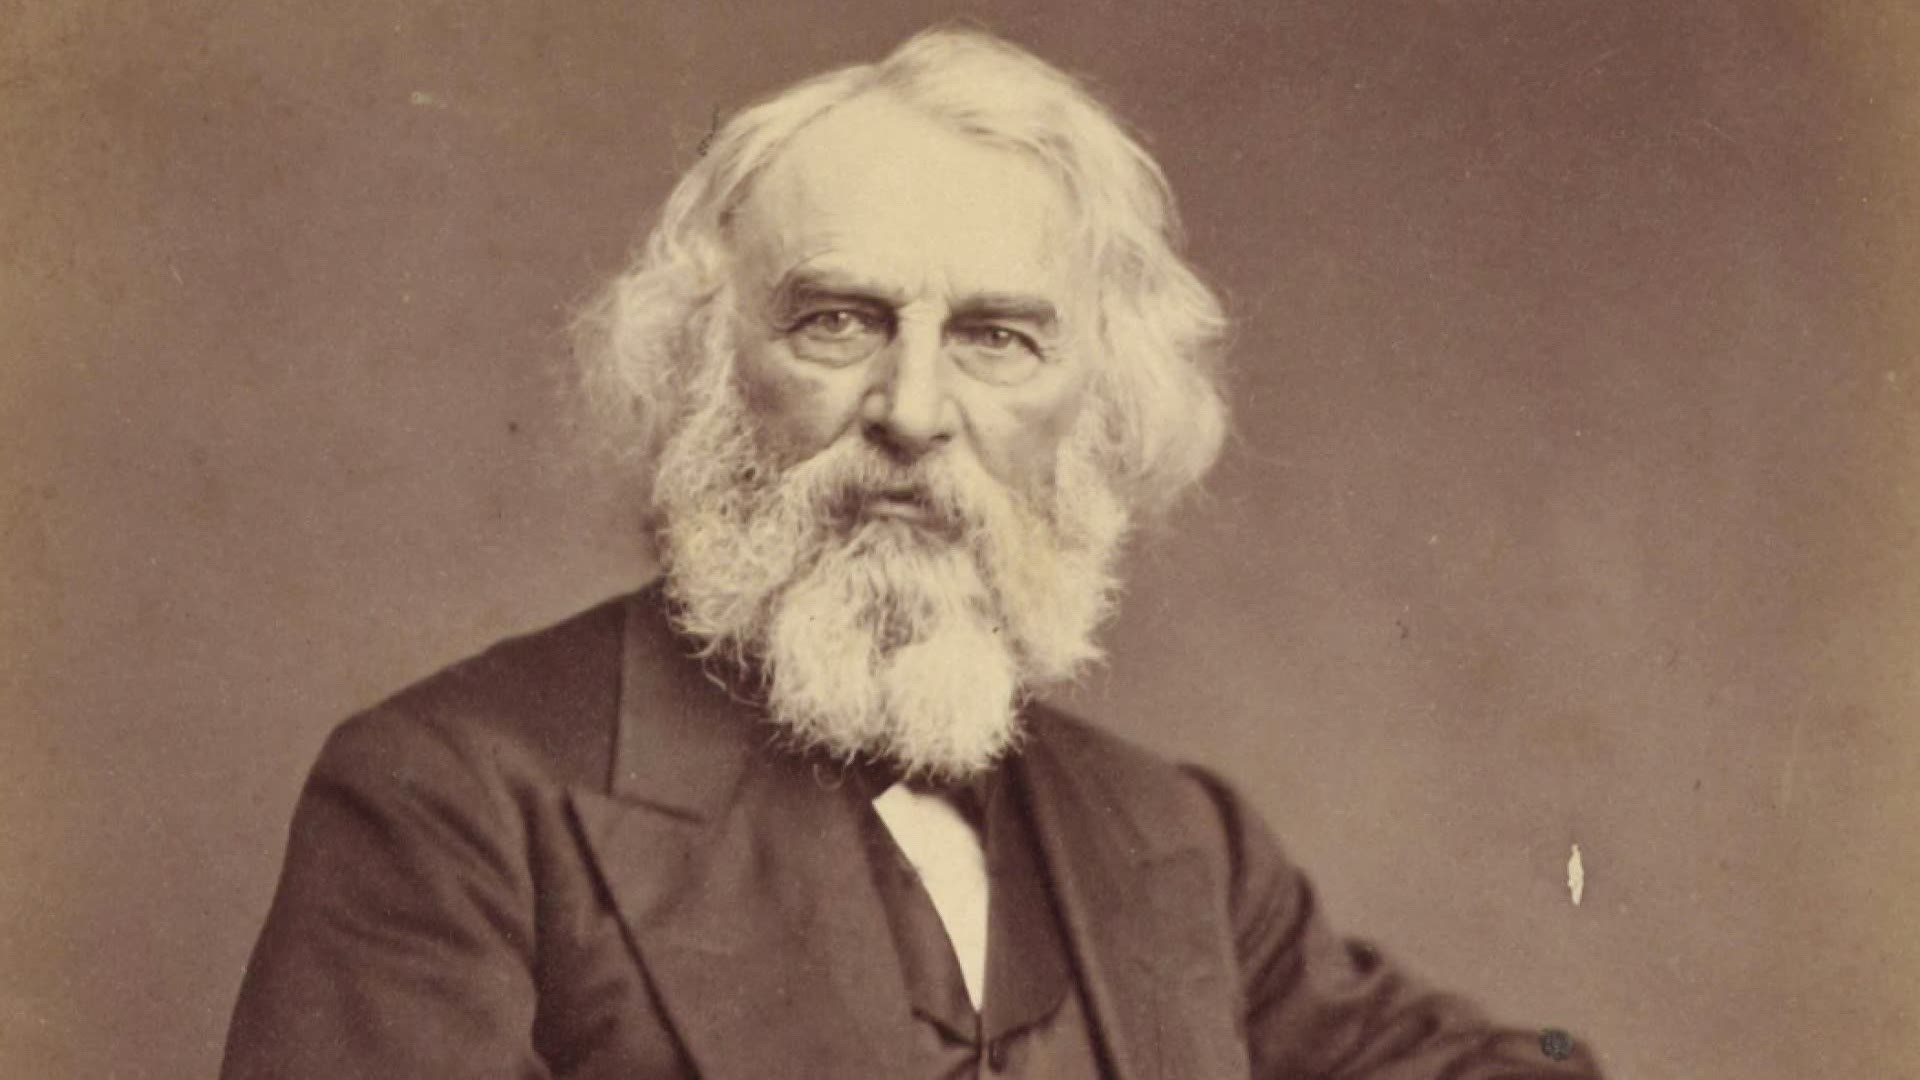 A new biography offers a fresh look at Henry Wadsworth Longfellow.